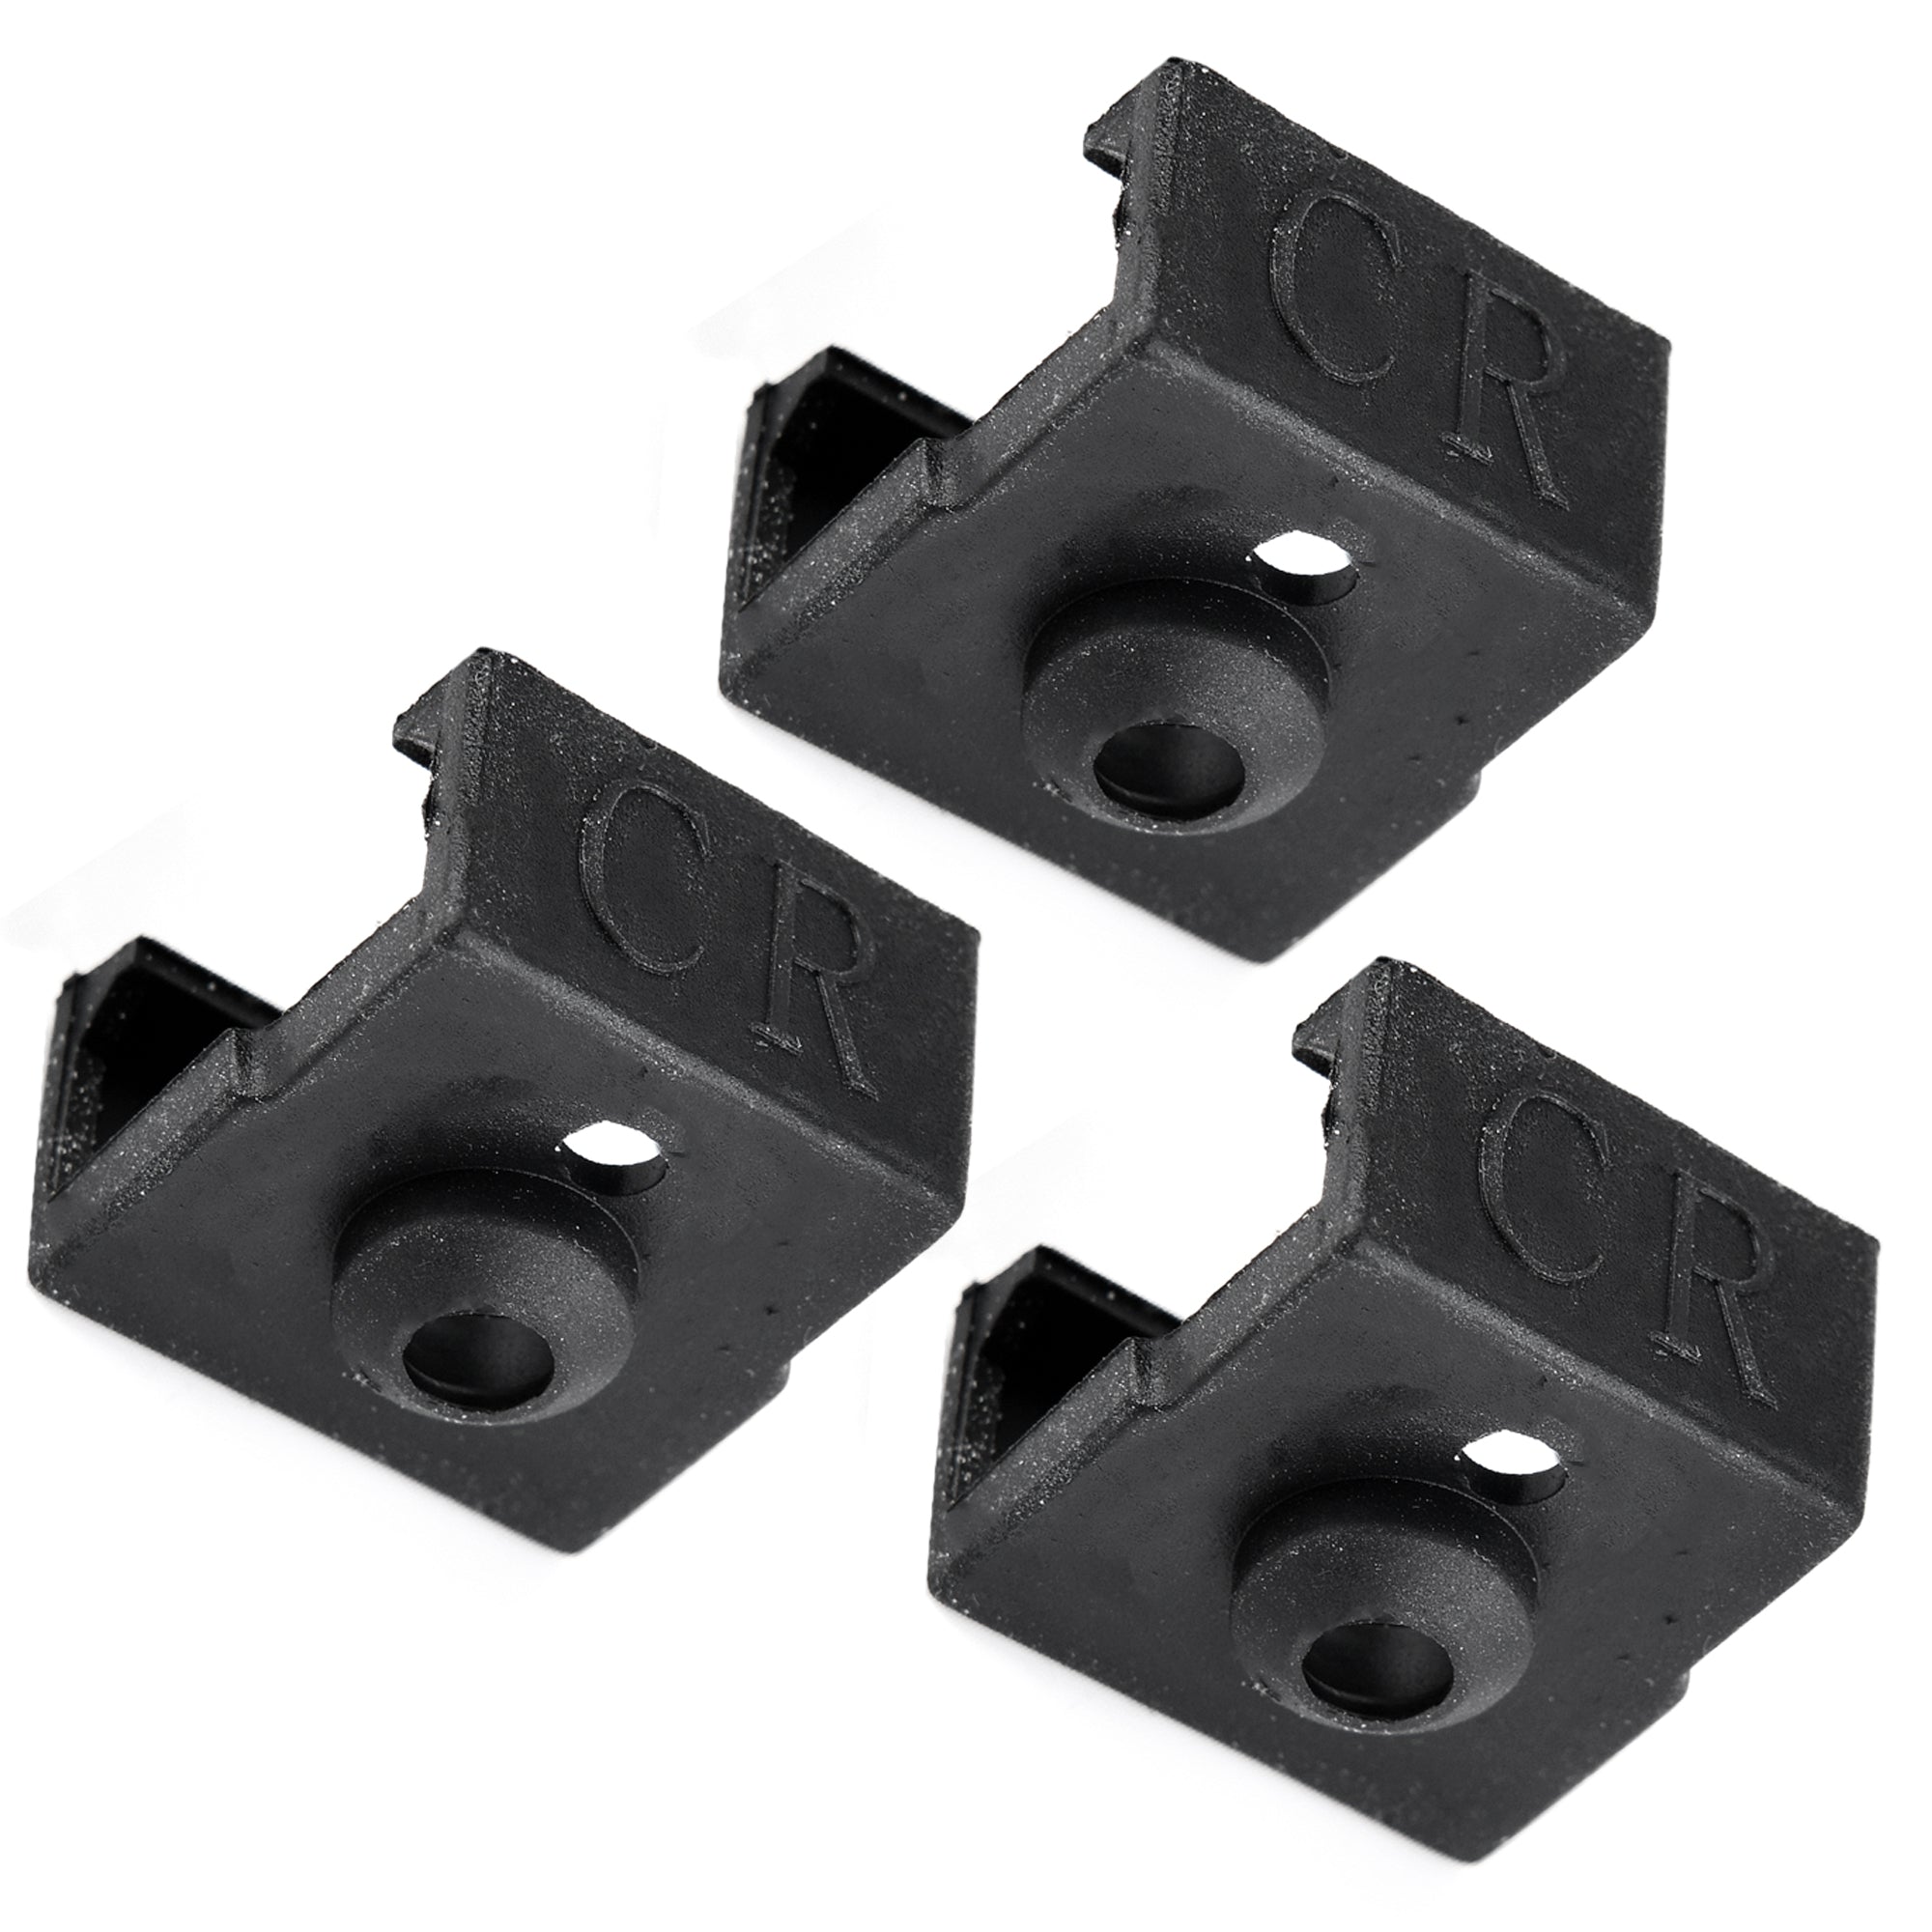 Ender-3 V2 Neo Hotend Kit Heater Block Silicone Cover Ender-3 Max Neo Ender  3 Neo - Smith3D Malaysia